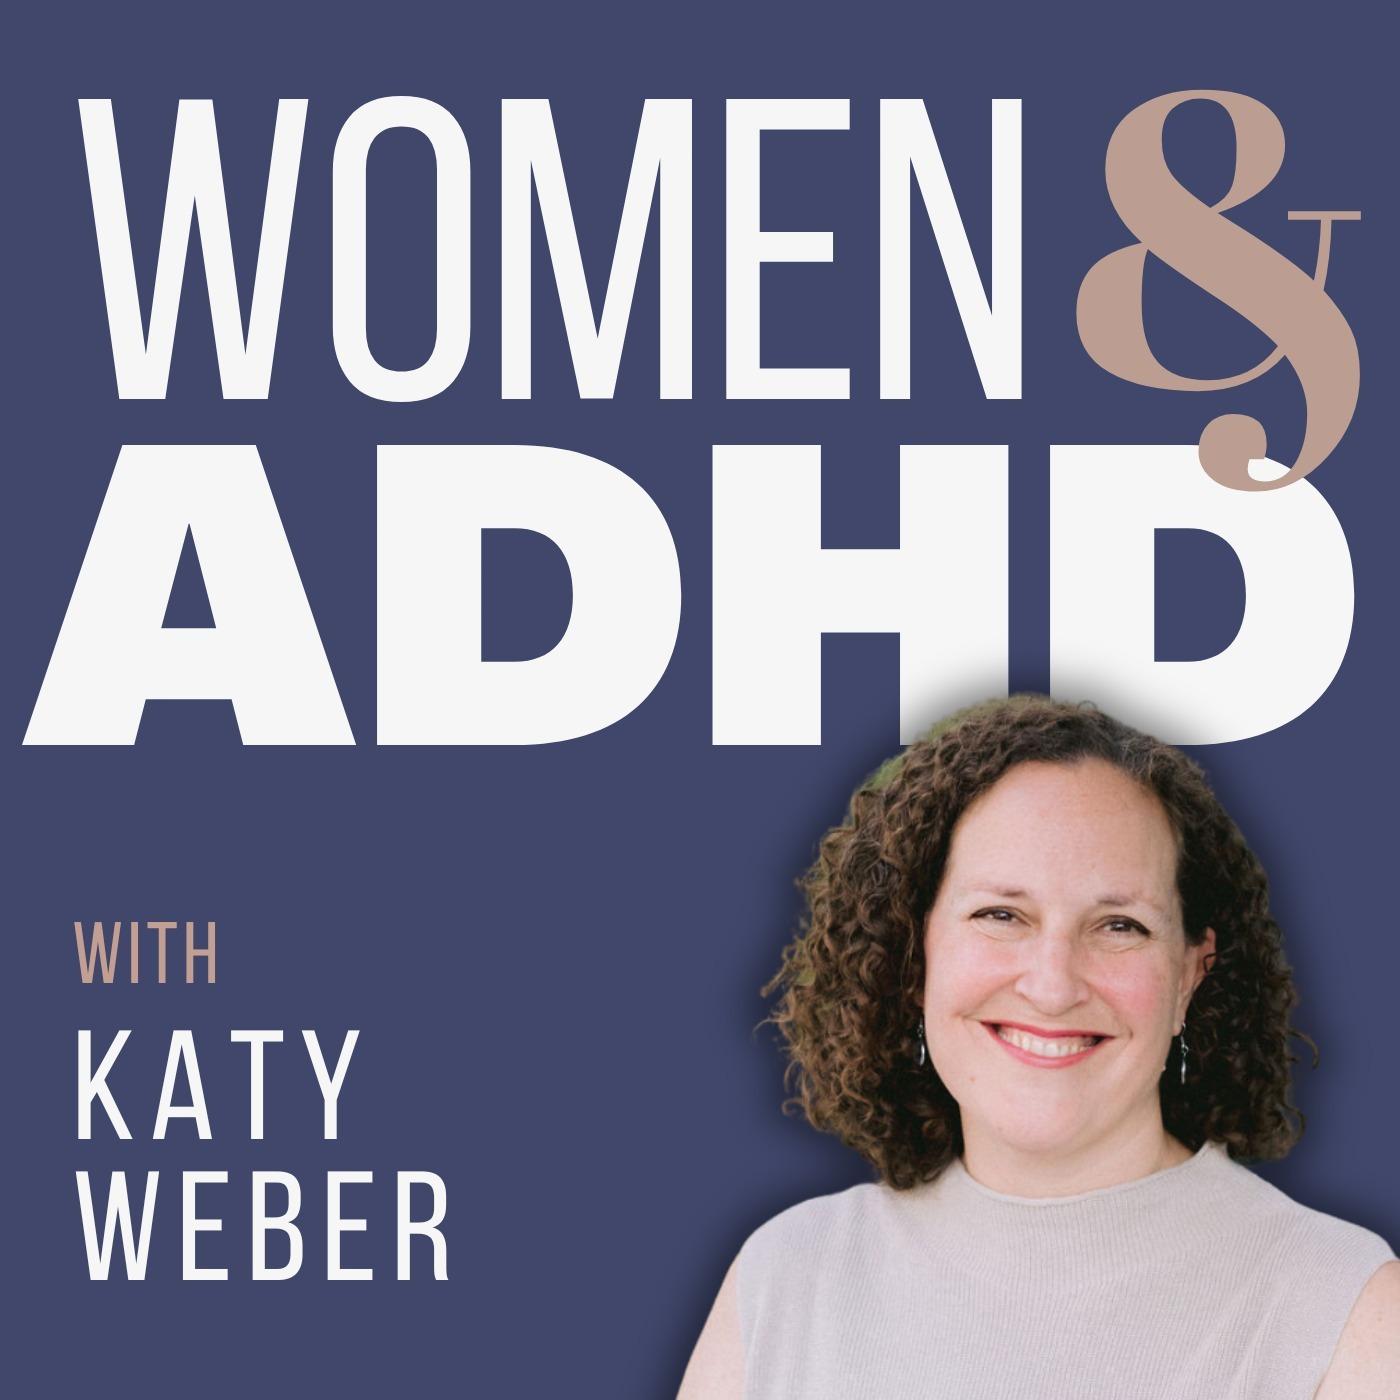 Over 60 with ADHD: Late Diagnosis of ADD in Women